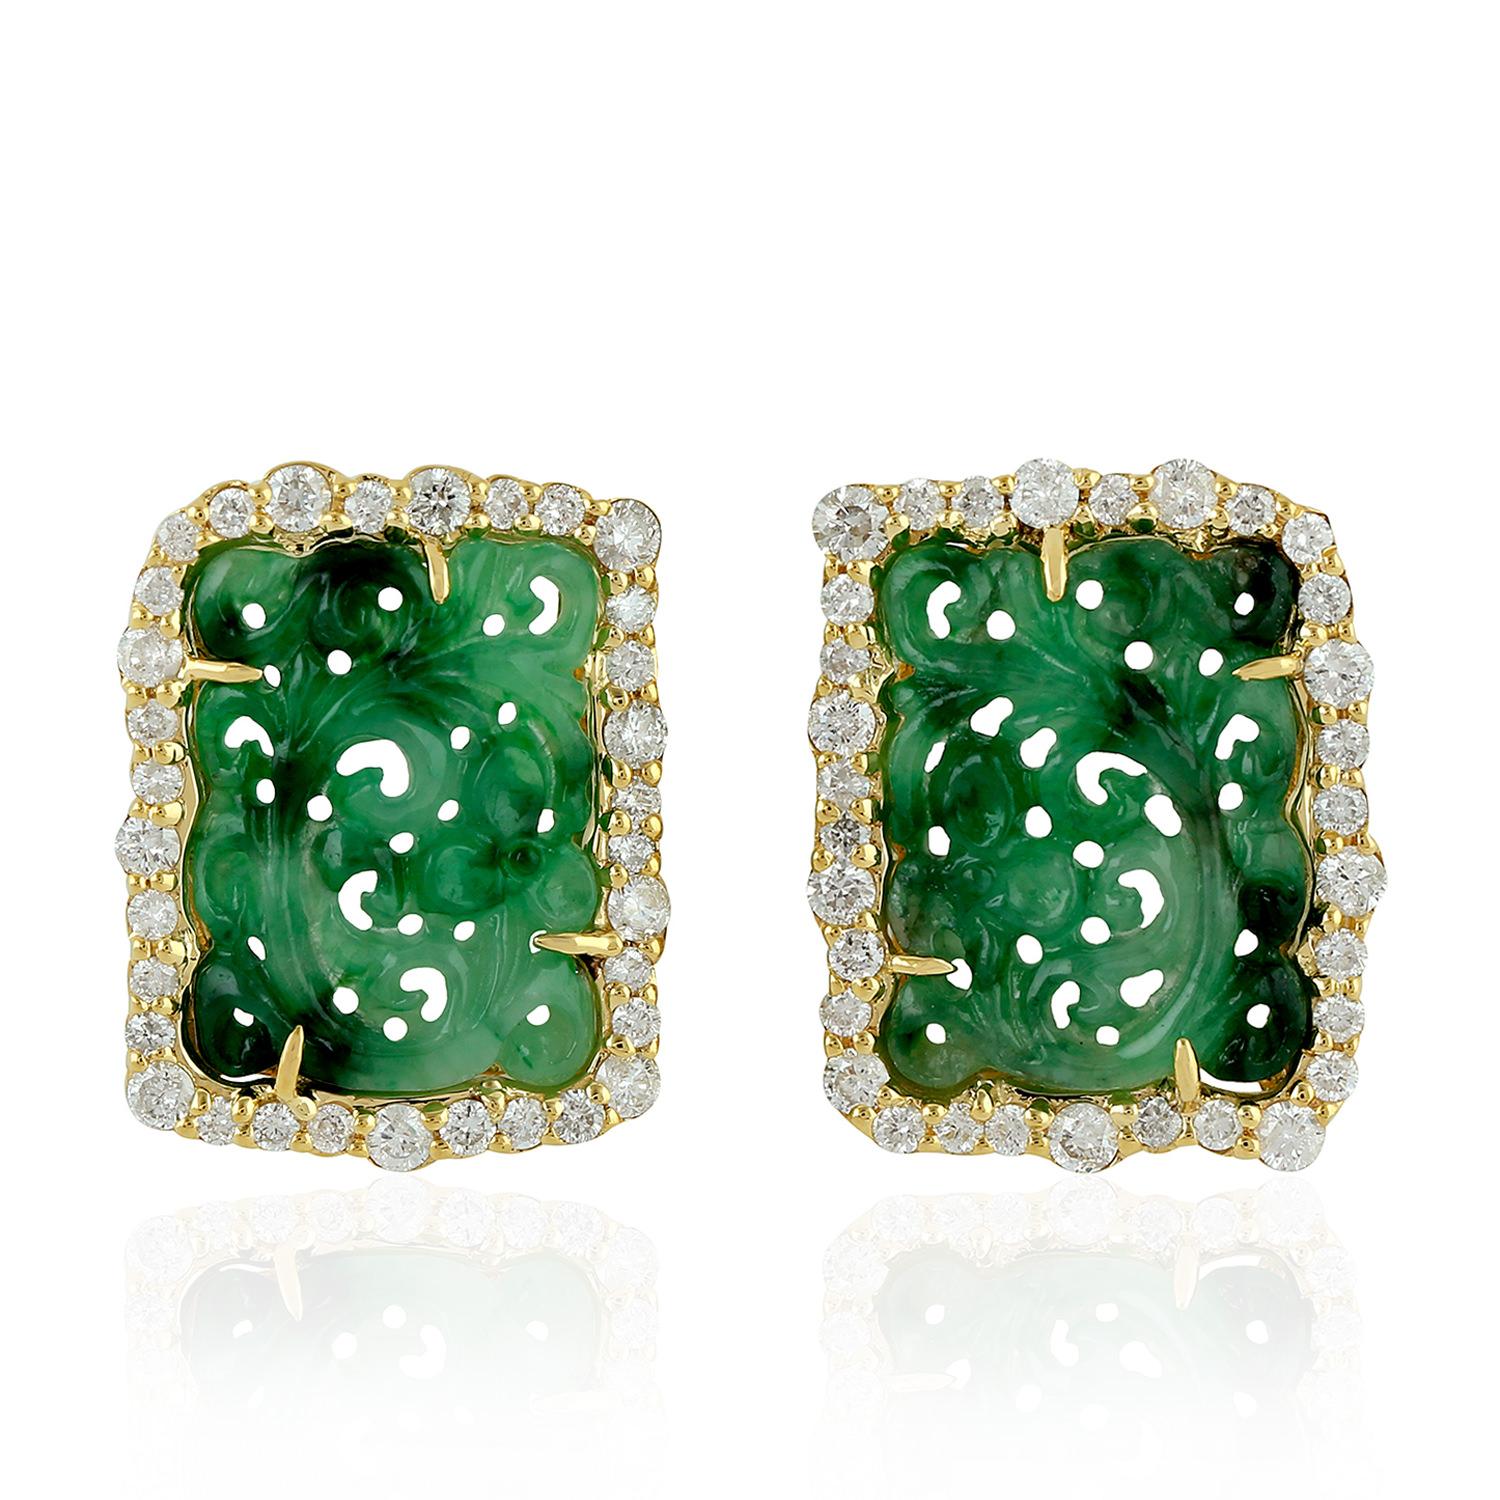 Mixed Cut Carved Jade Stud Earrings With Diamonds All Around Made In 18k Yellow Gold For Sale